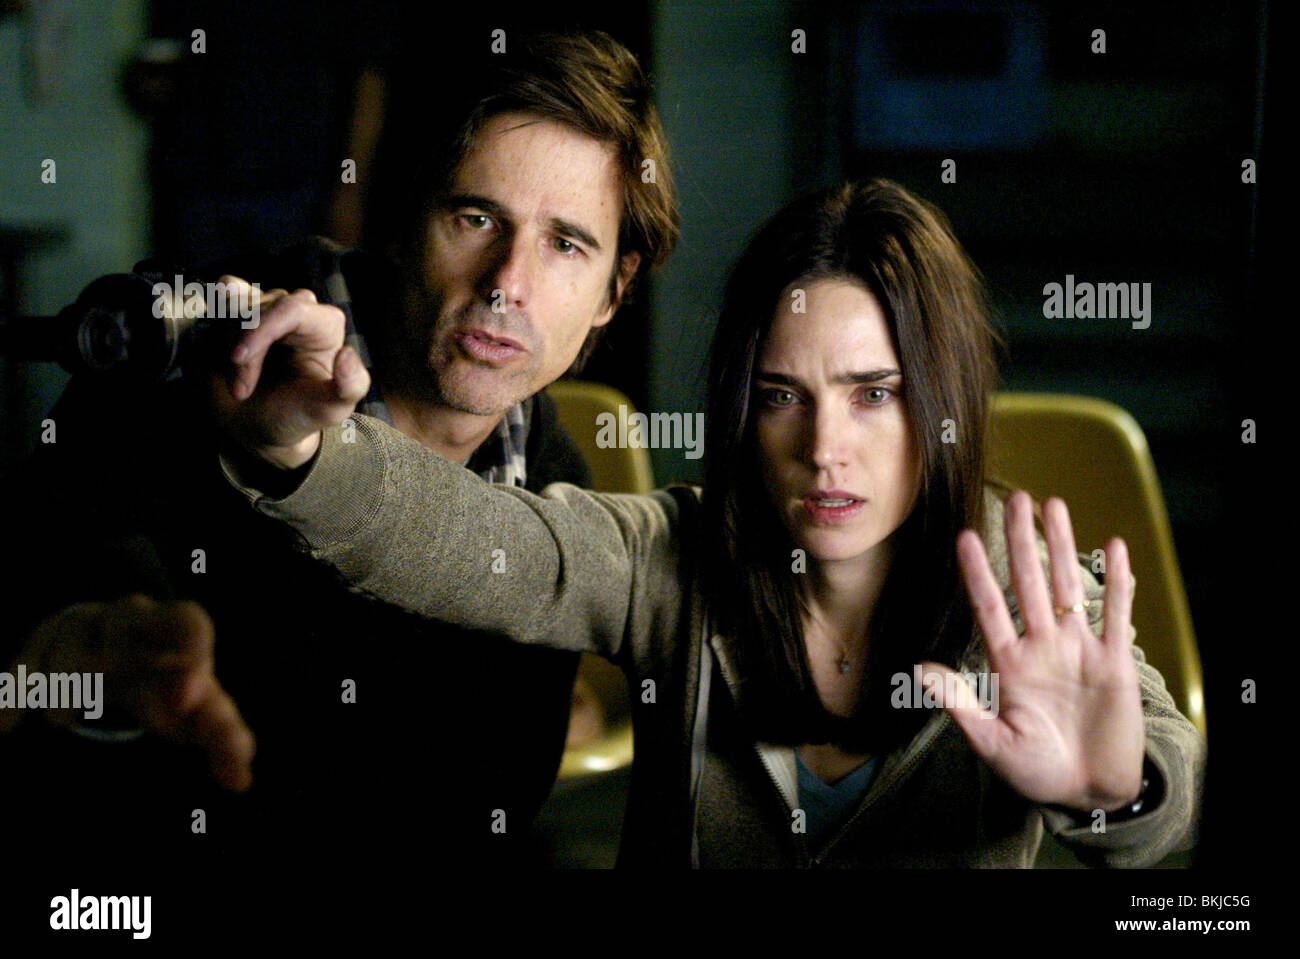 FILMING O/S 'DARK WATER' (2005) WITH WALTER SALLES (DIR), JENNIFER CONNELLY DKWR 001-F02 Stock Photo